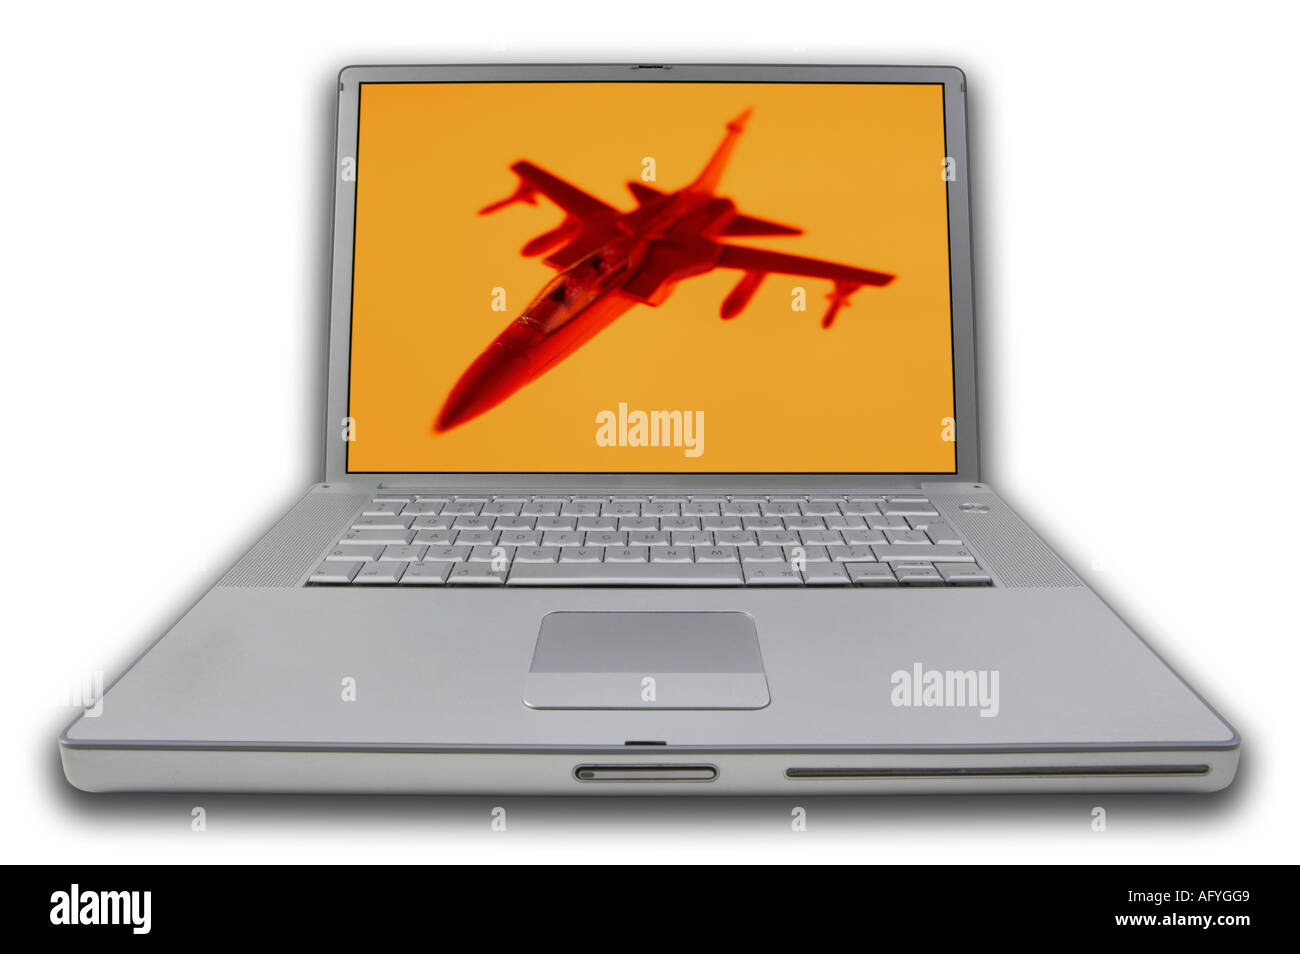 LAP TOP NOTE BOOK PERSONAL COMPUTER WITH SCREEN DISPLAYING PICTURE OF RED JET FIGHTER AIRCRAFT Stock Photo